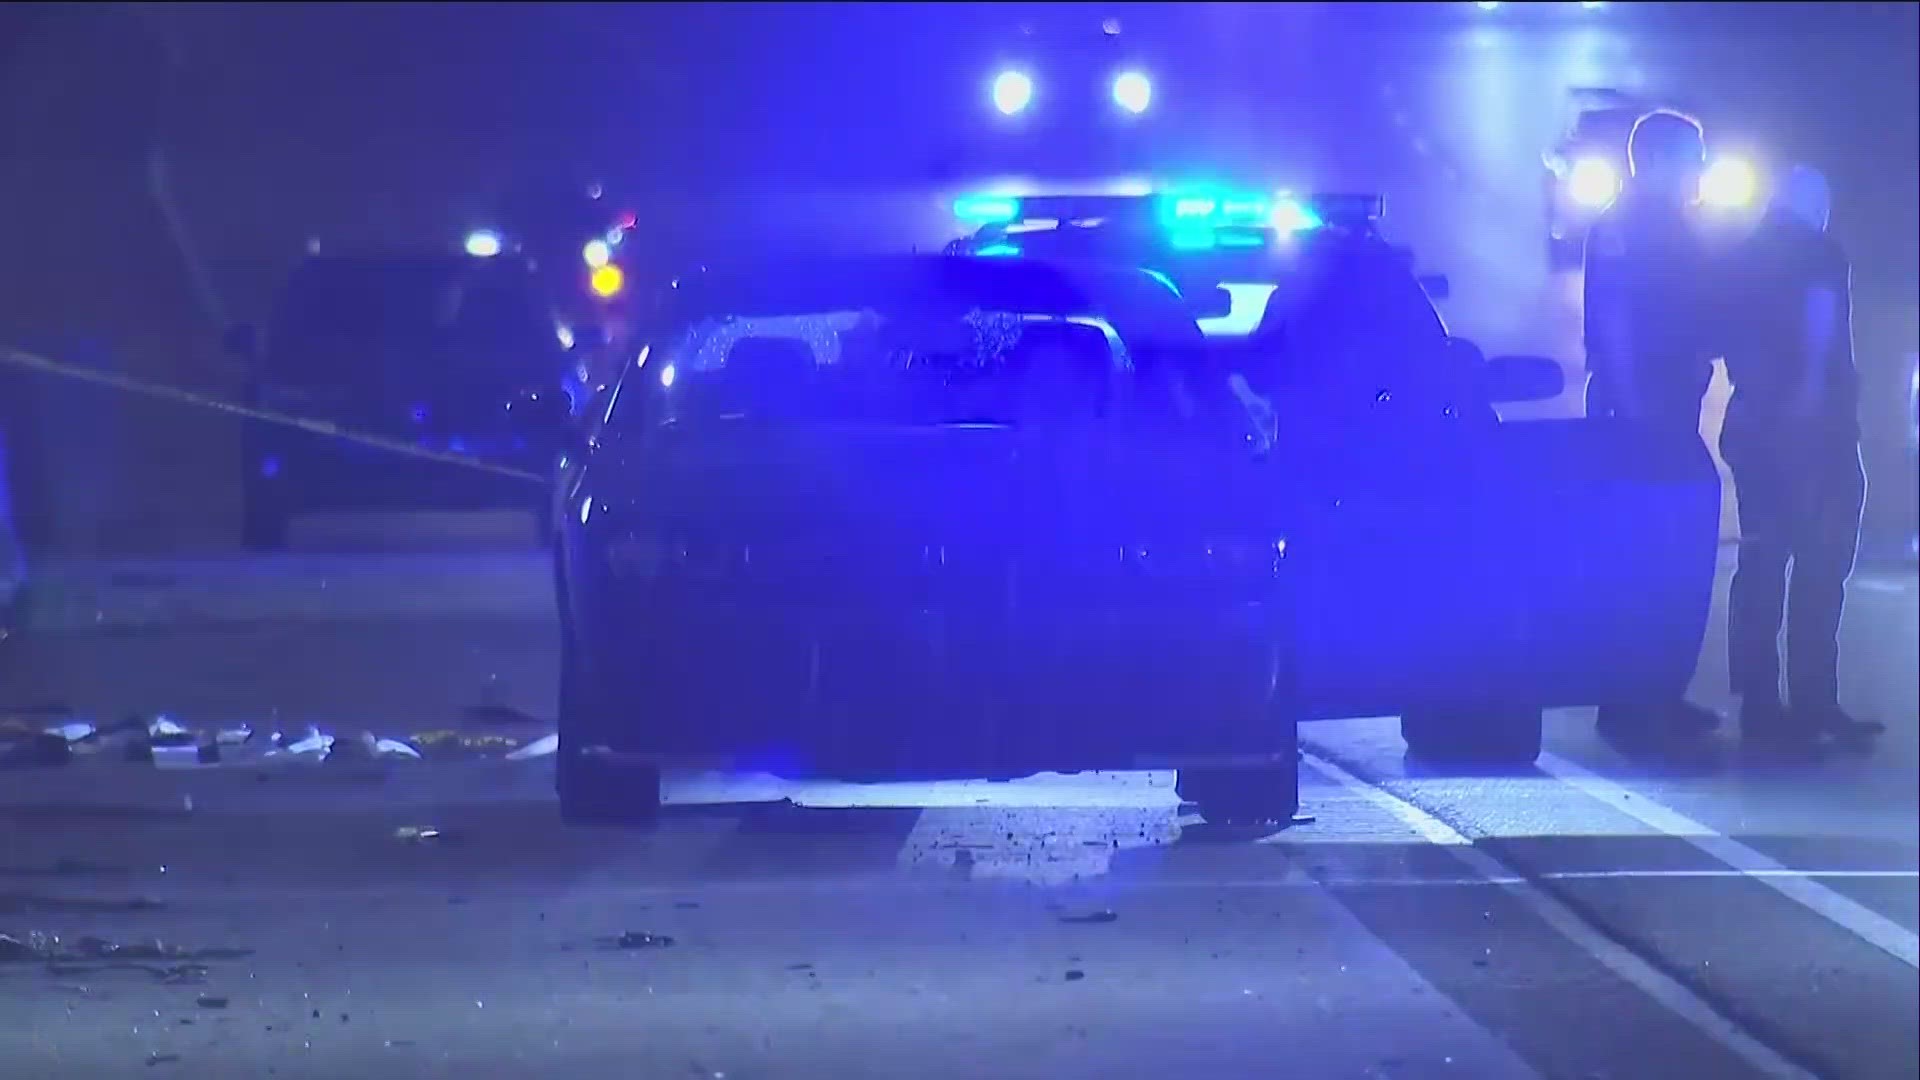 Cobb County Police said when the officer approached the car, the driver reached for a gun.